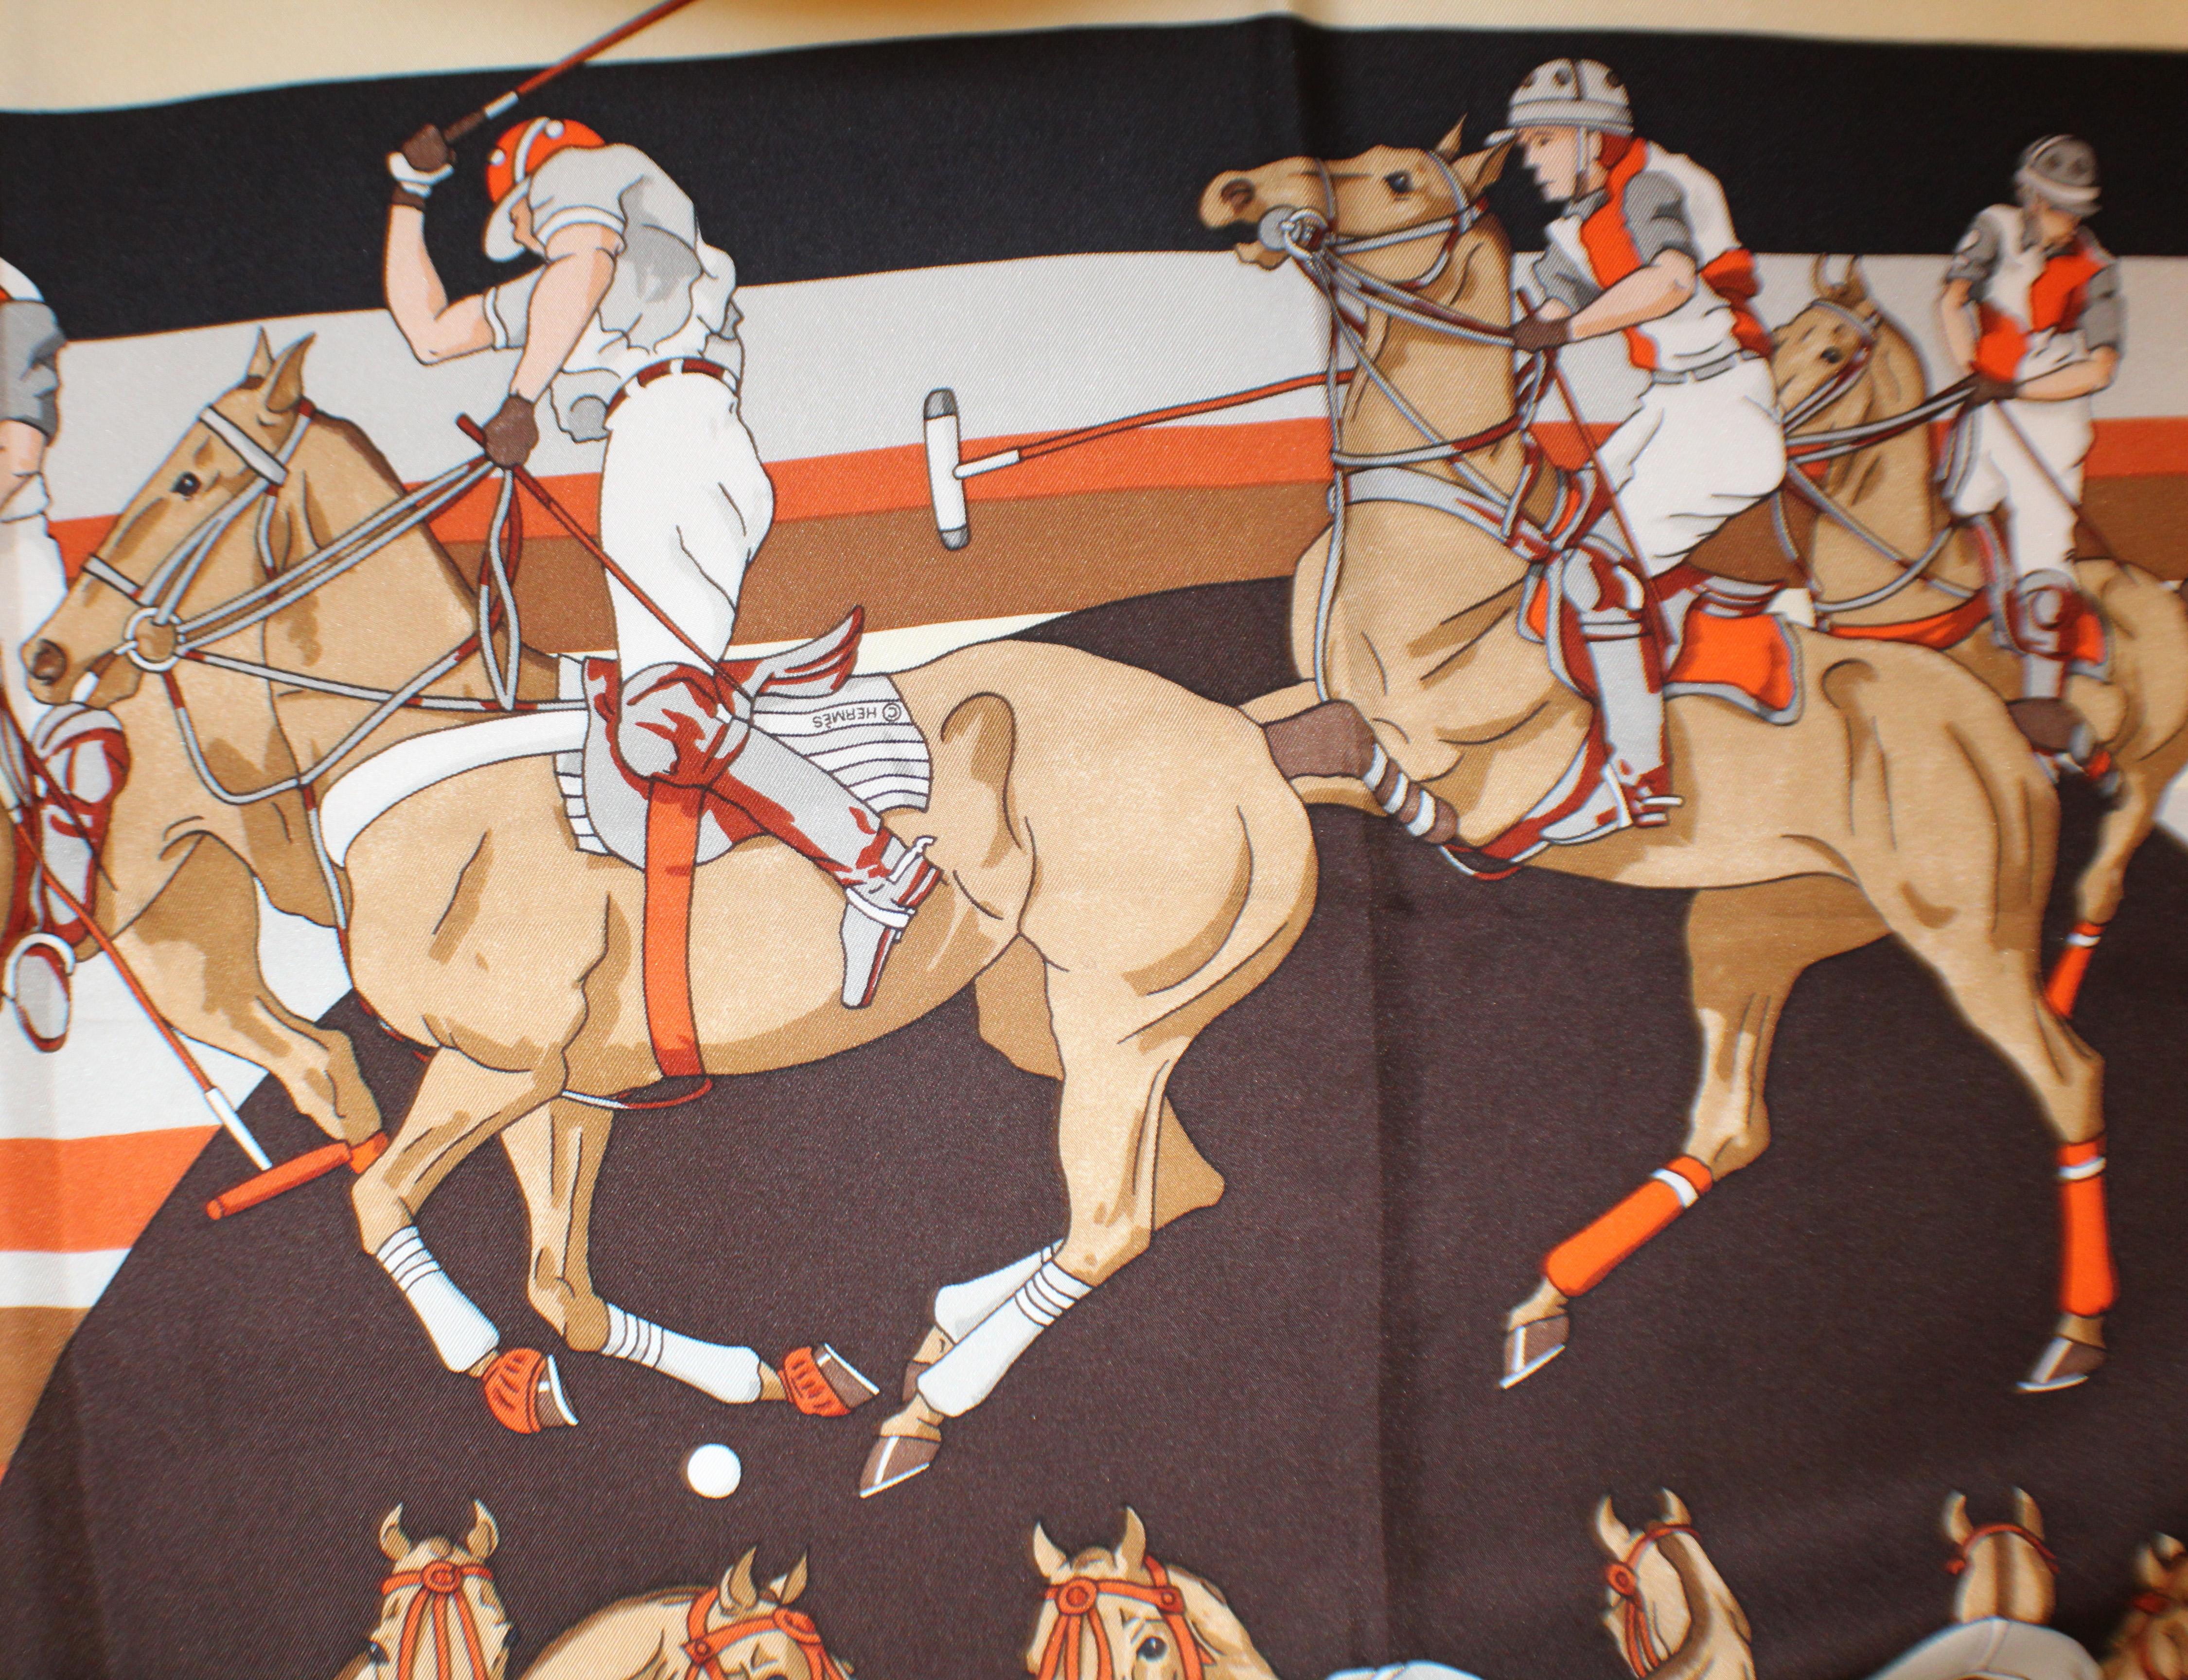 Les Poneys de Polo Artist silk carre scarf was created by Hubert de Watrigant. and issued in 2010.  For lovers of Hermes and all things Equestrian!  Polo is the Sport of Kings! Horses are depicted in such lifelike images! Hermes signature orange